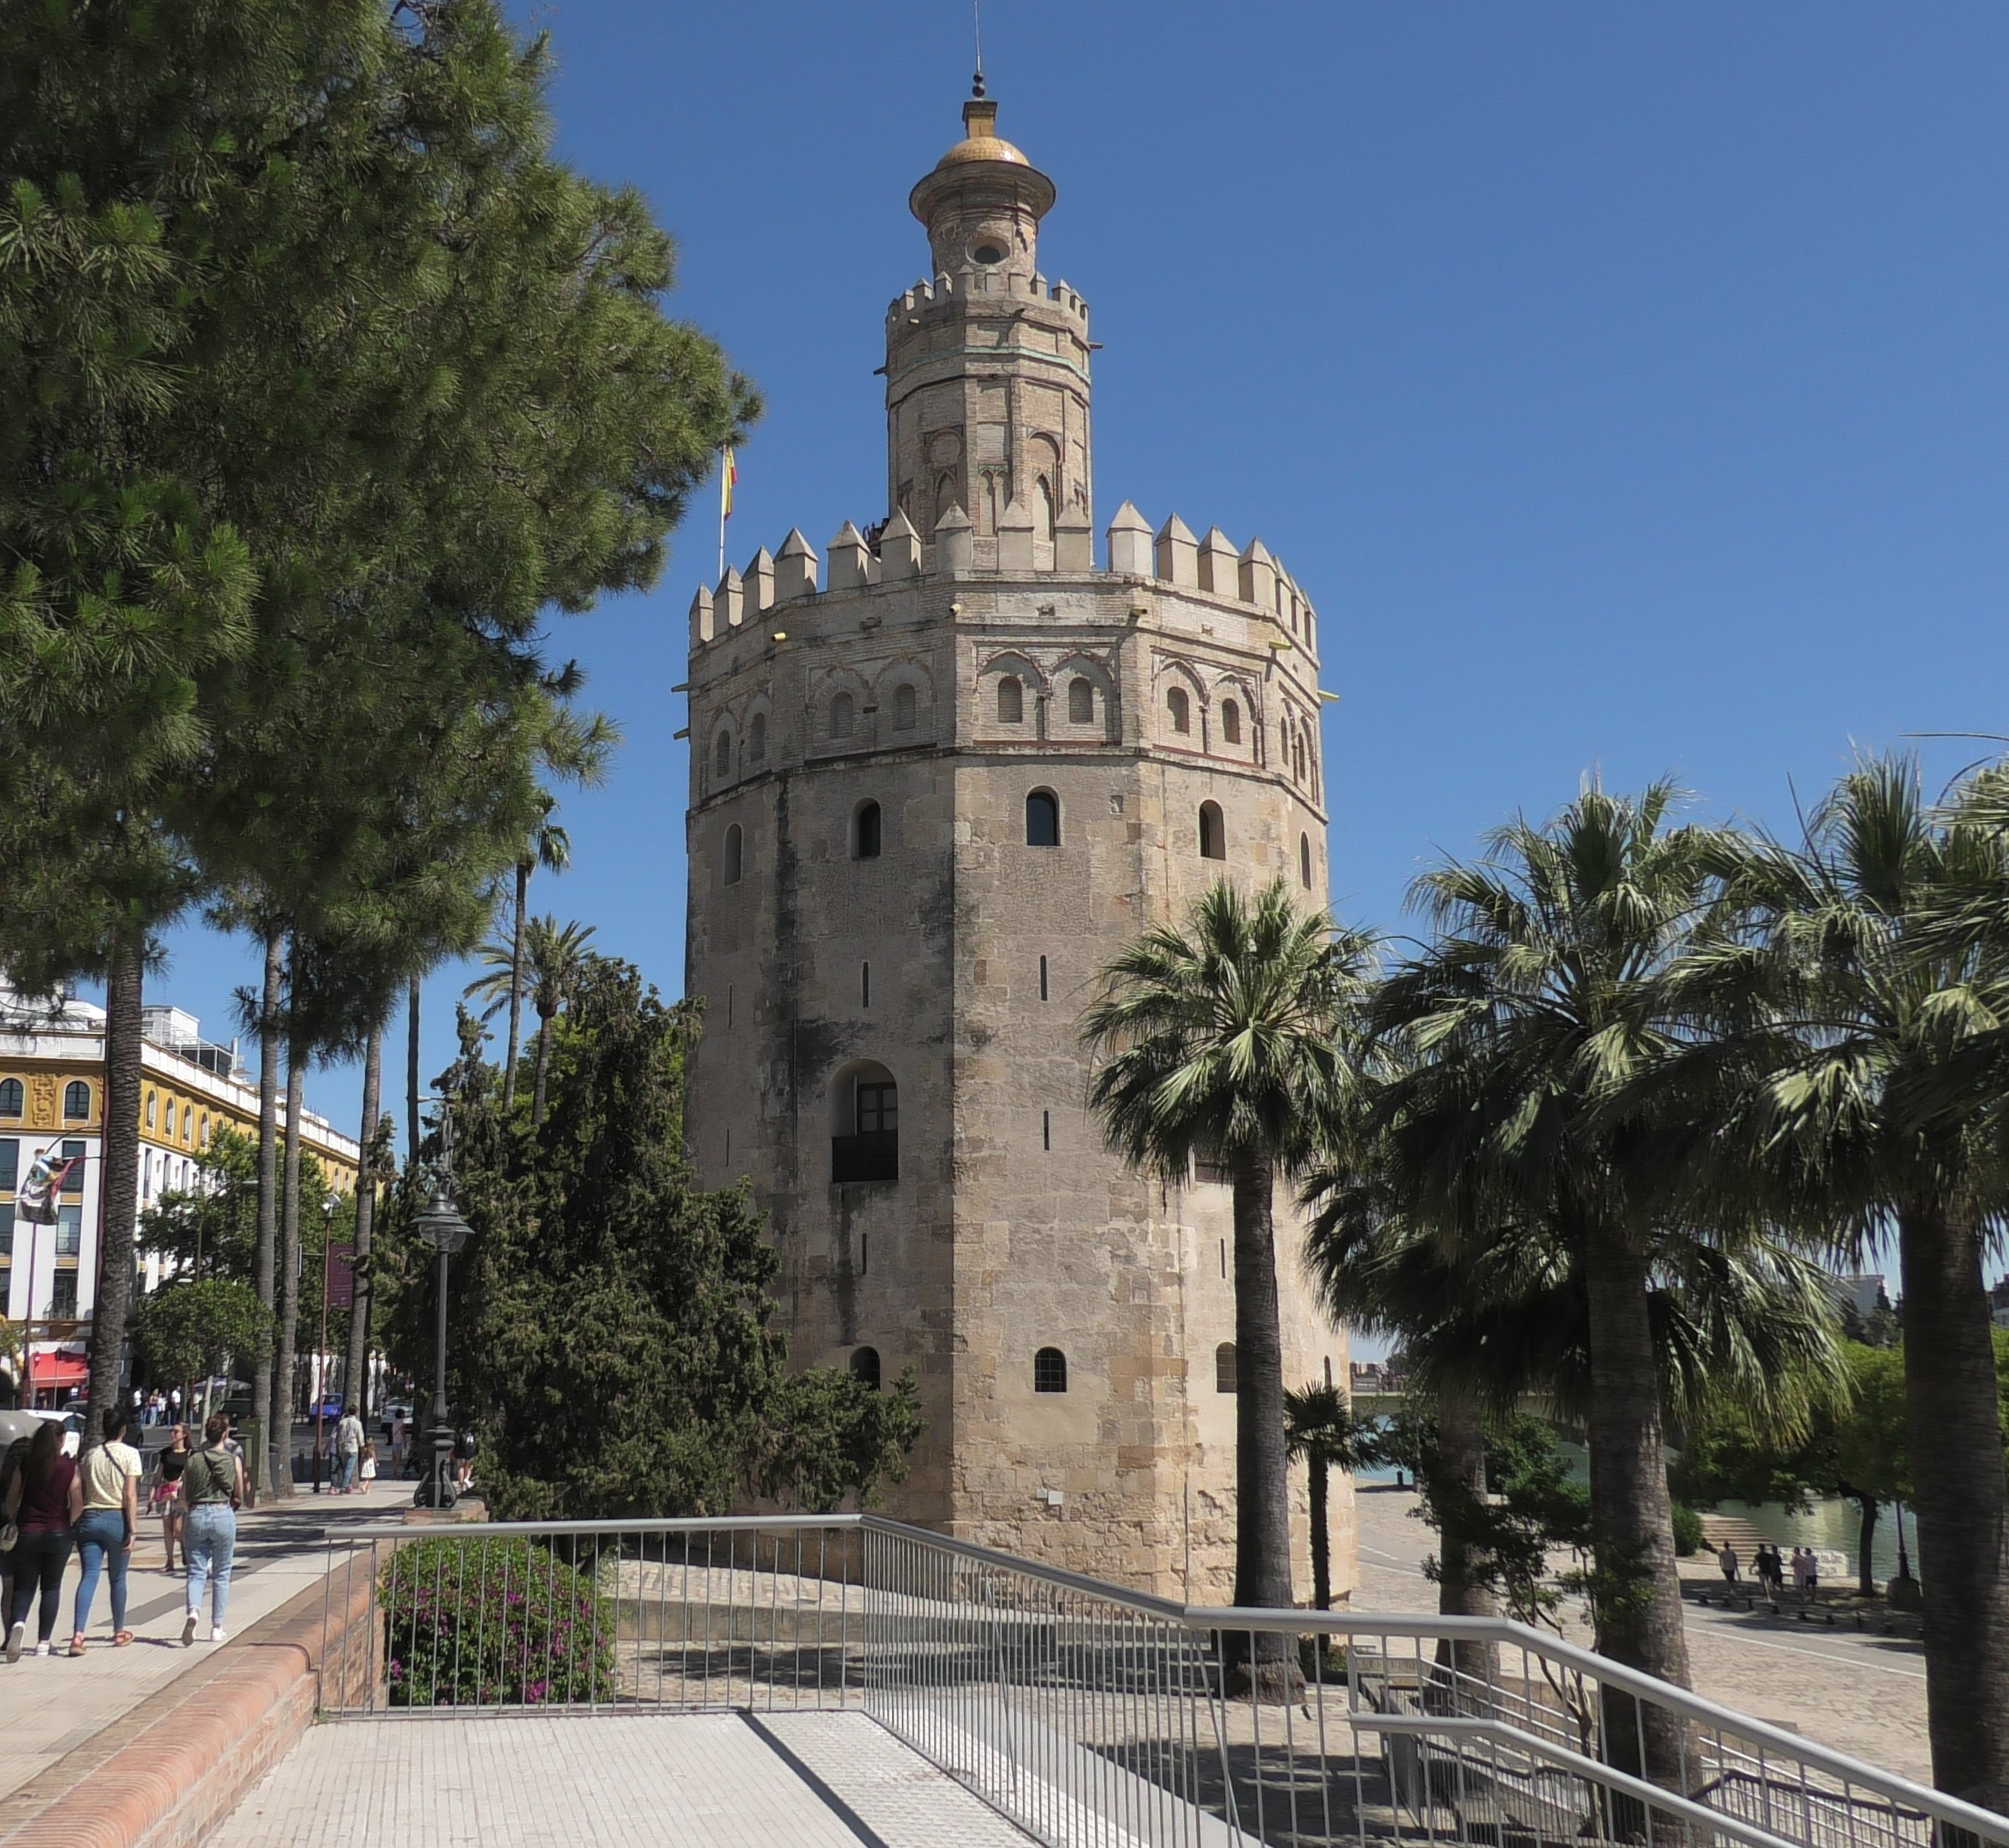 Torre del Oro (golden tower) in the city of Seville, Spain